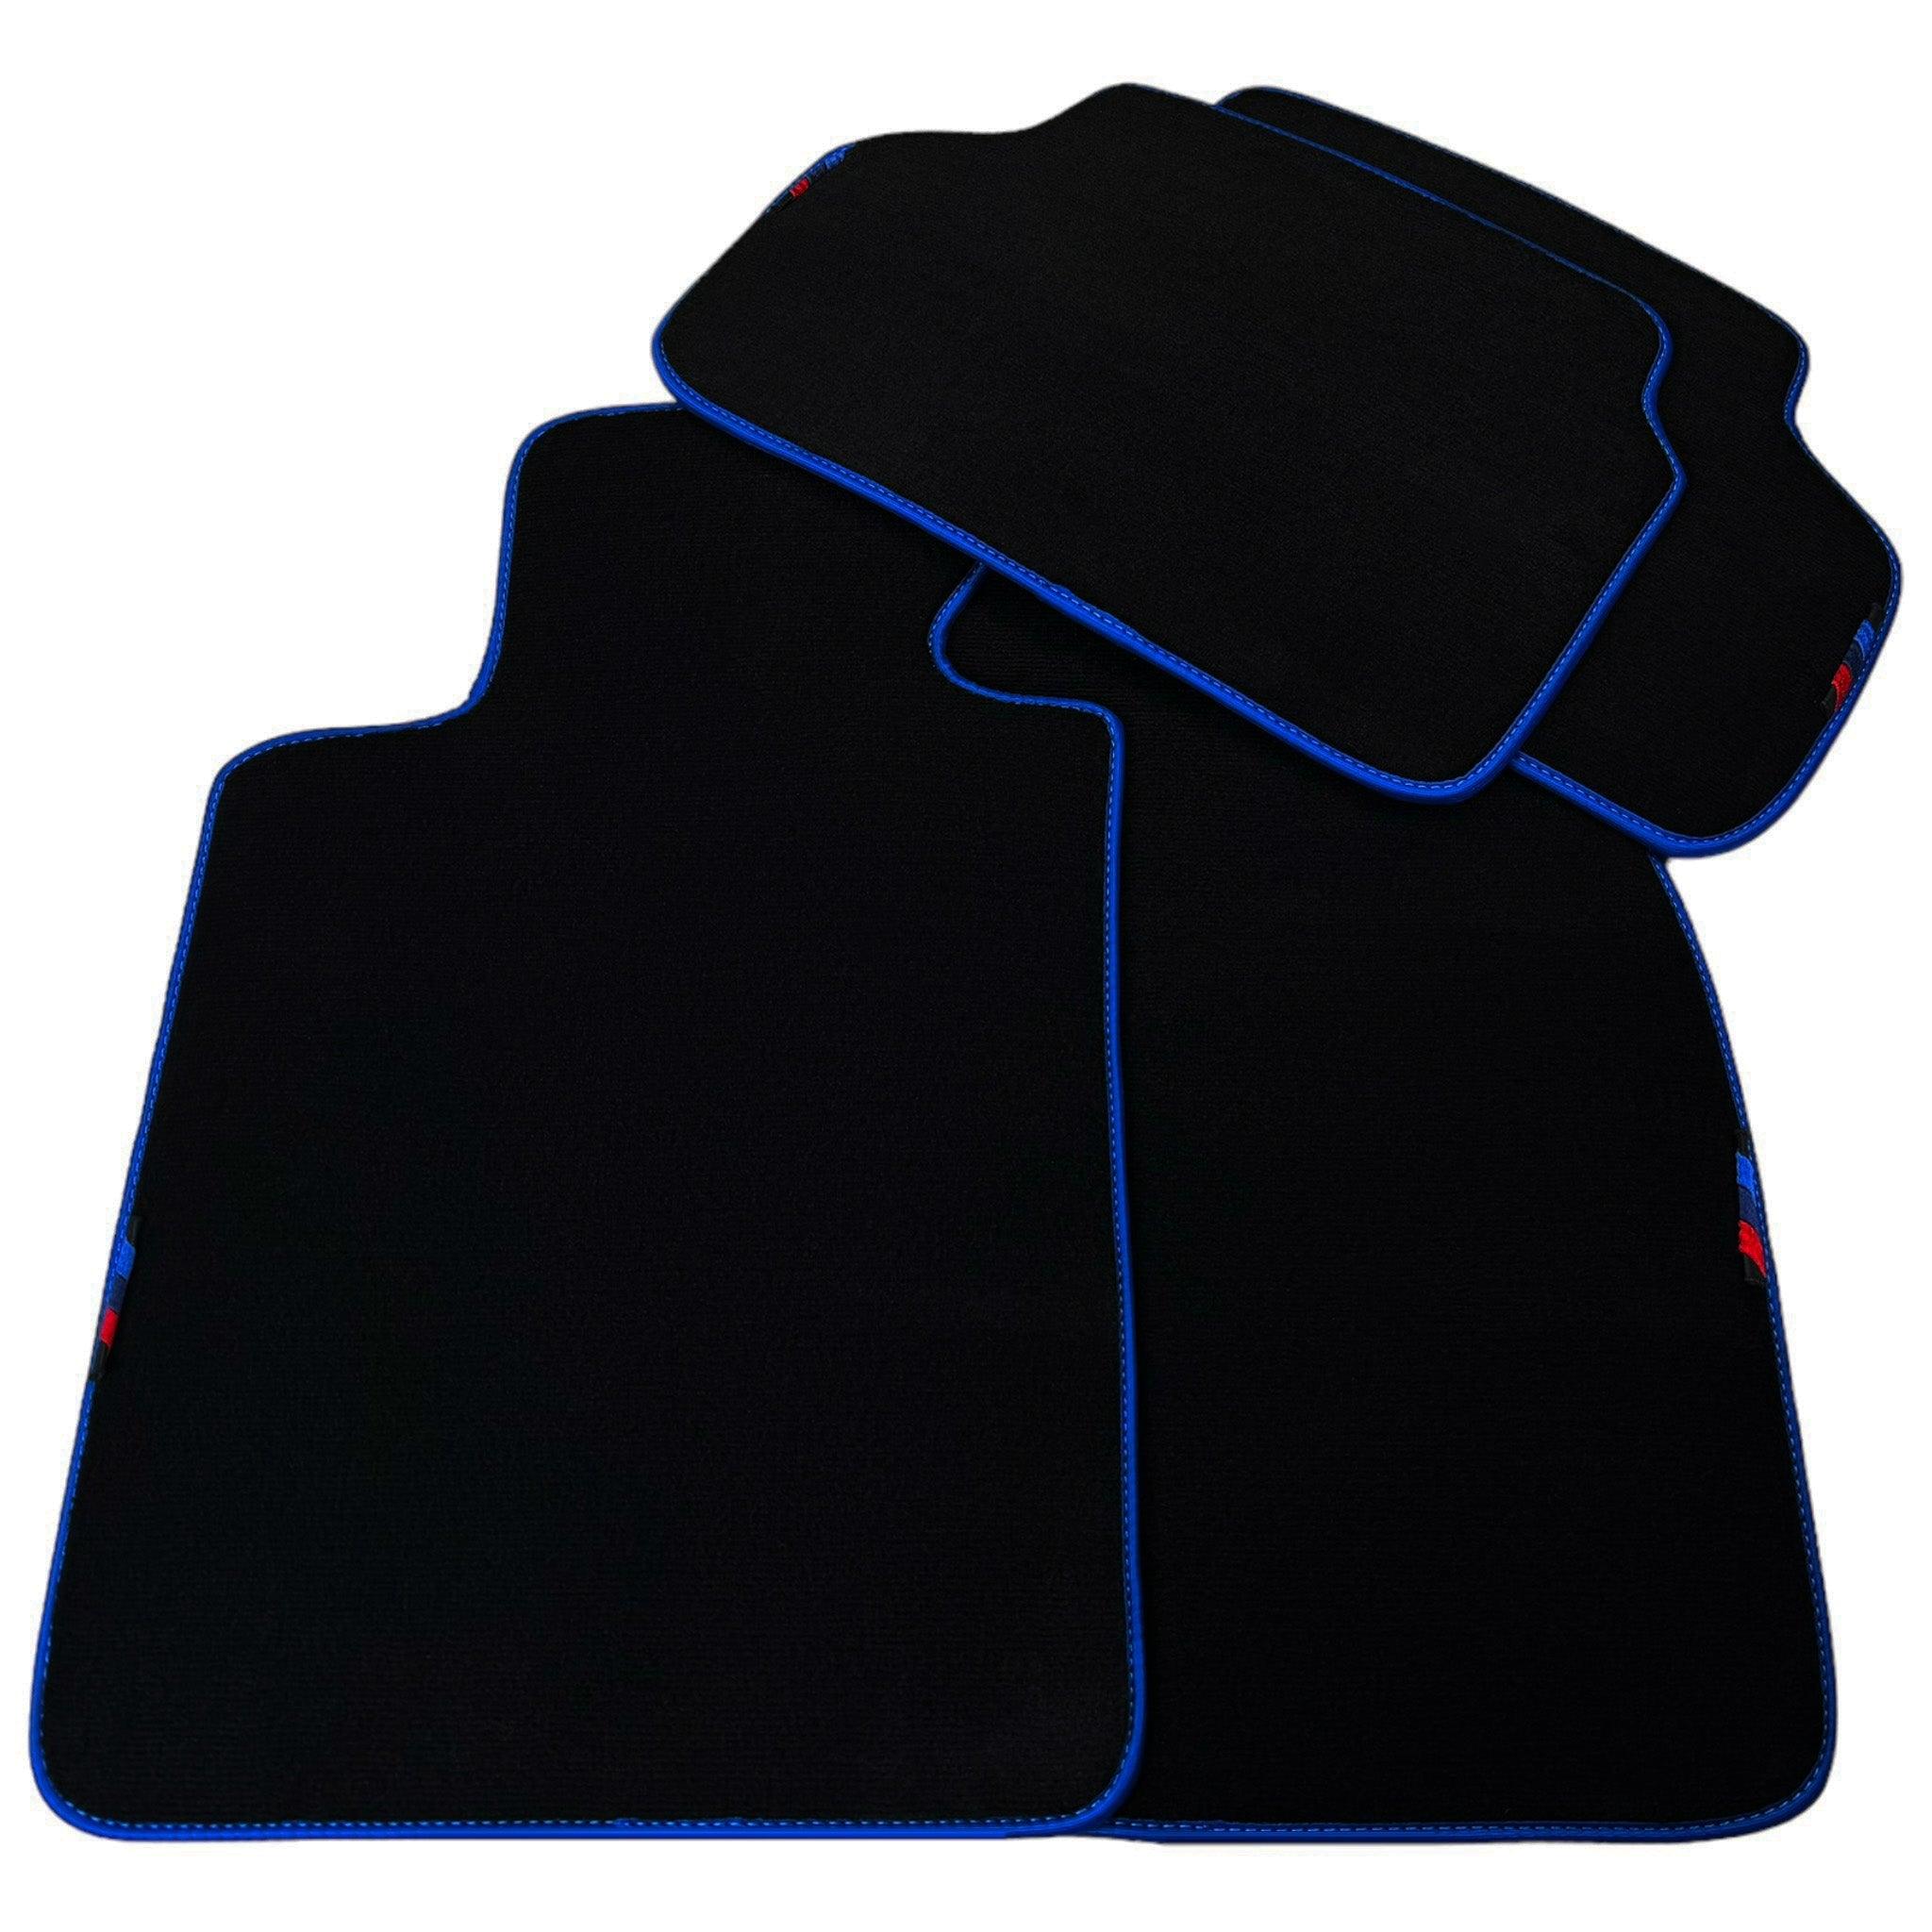 Black Floor Mats For BMW 7 Series E38 Long | Fighter Jet Edition